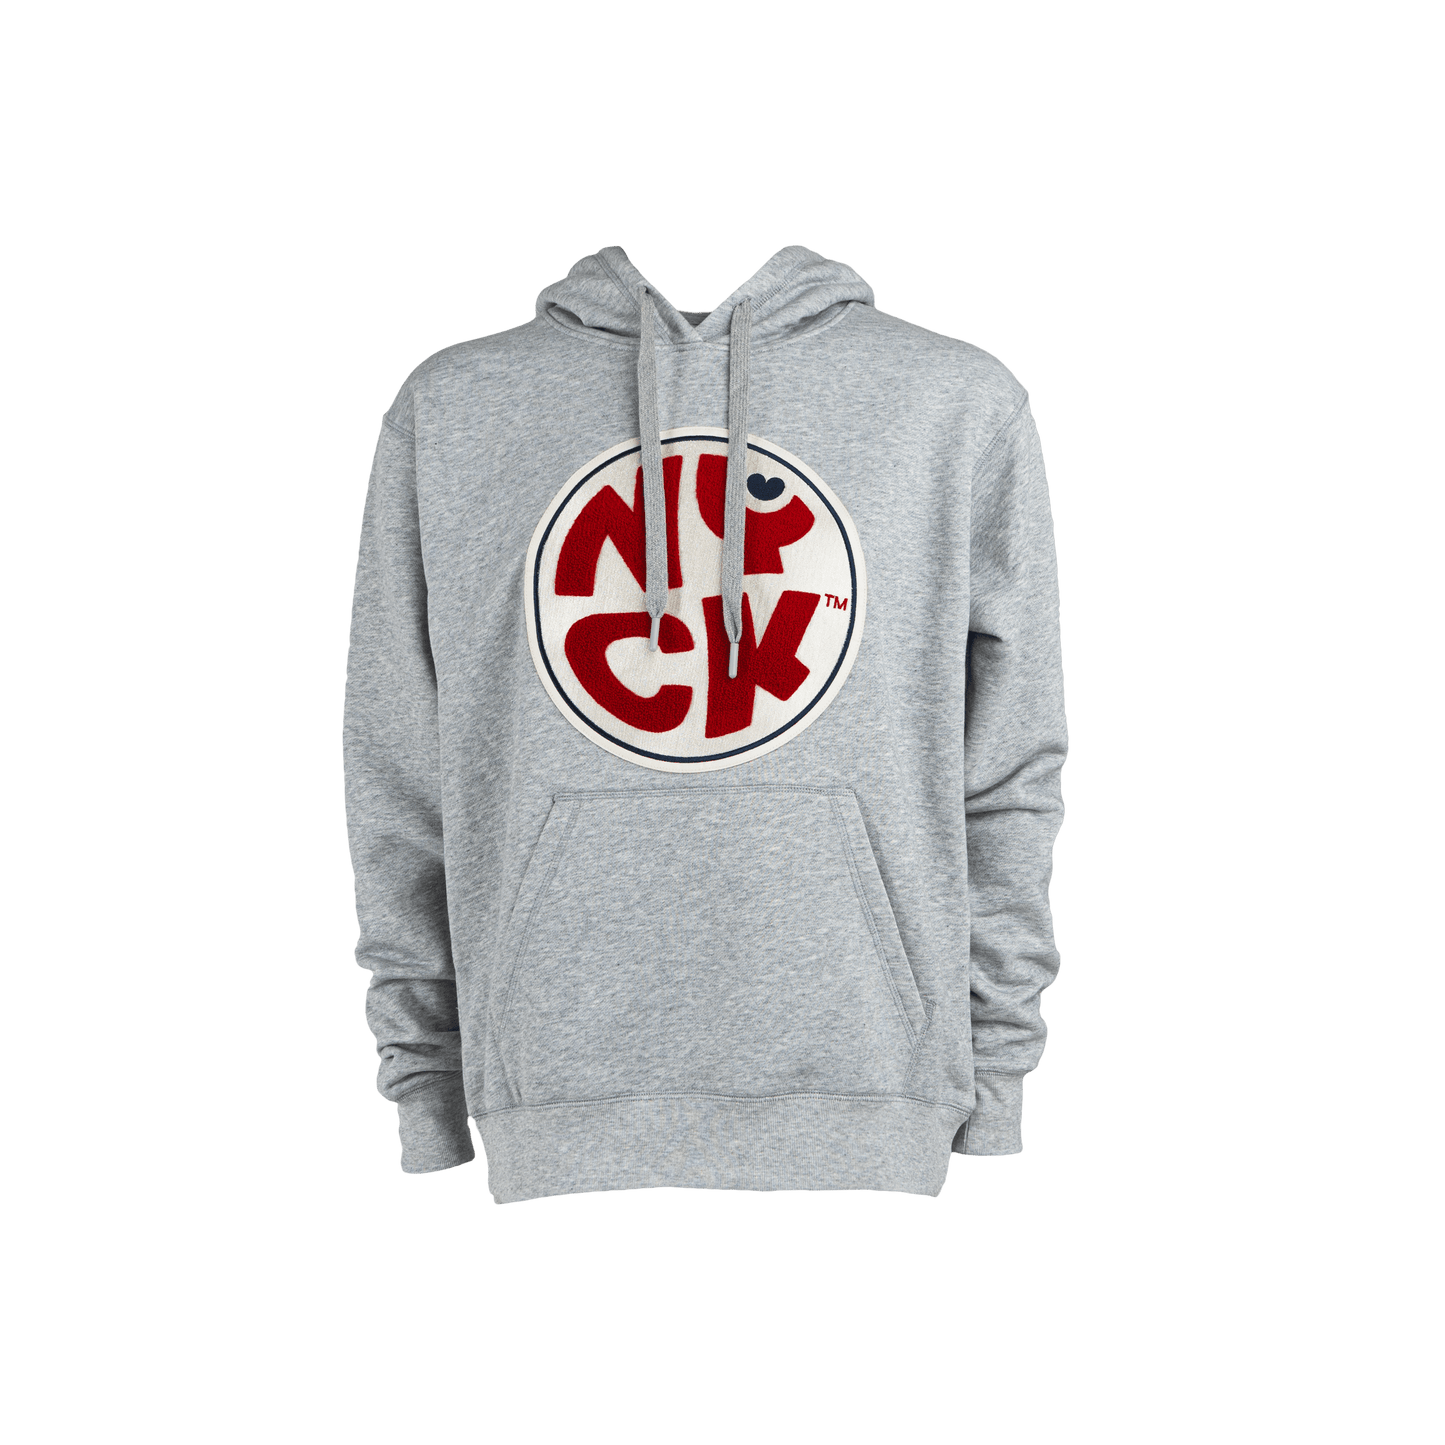 The official NYCK logo hoodie